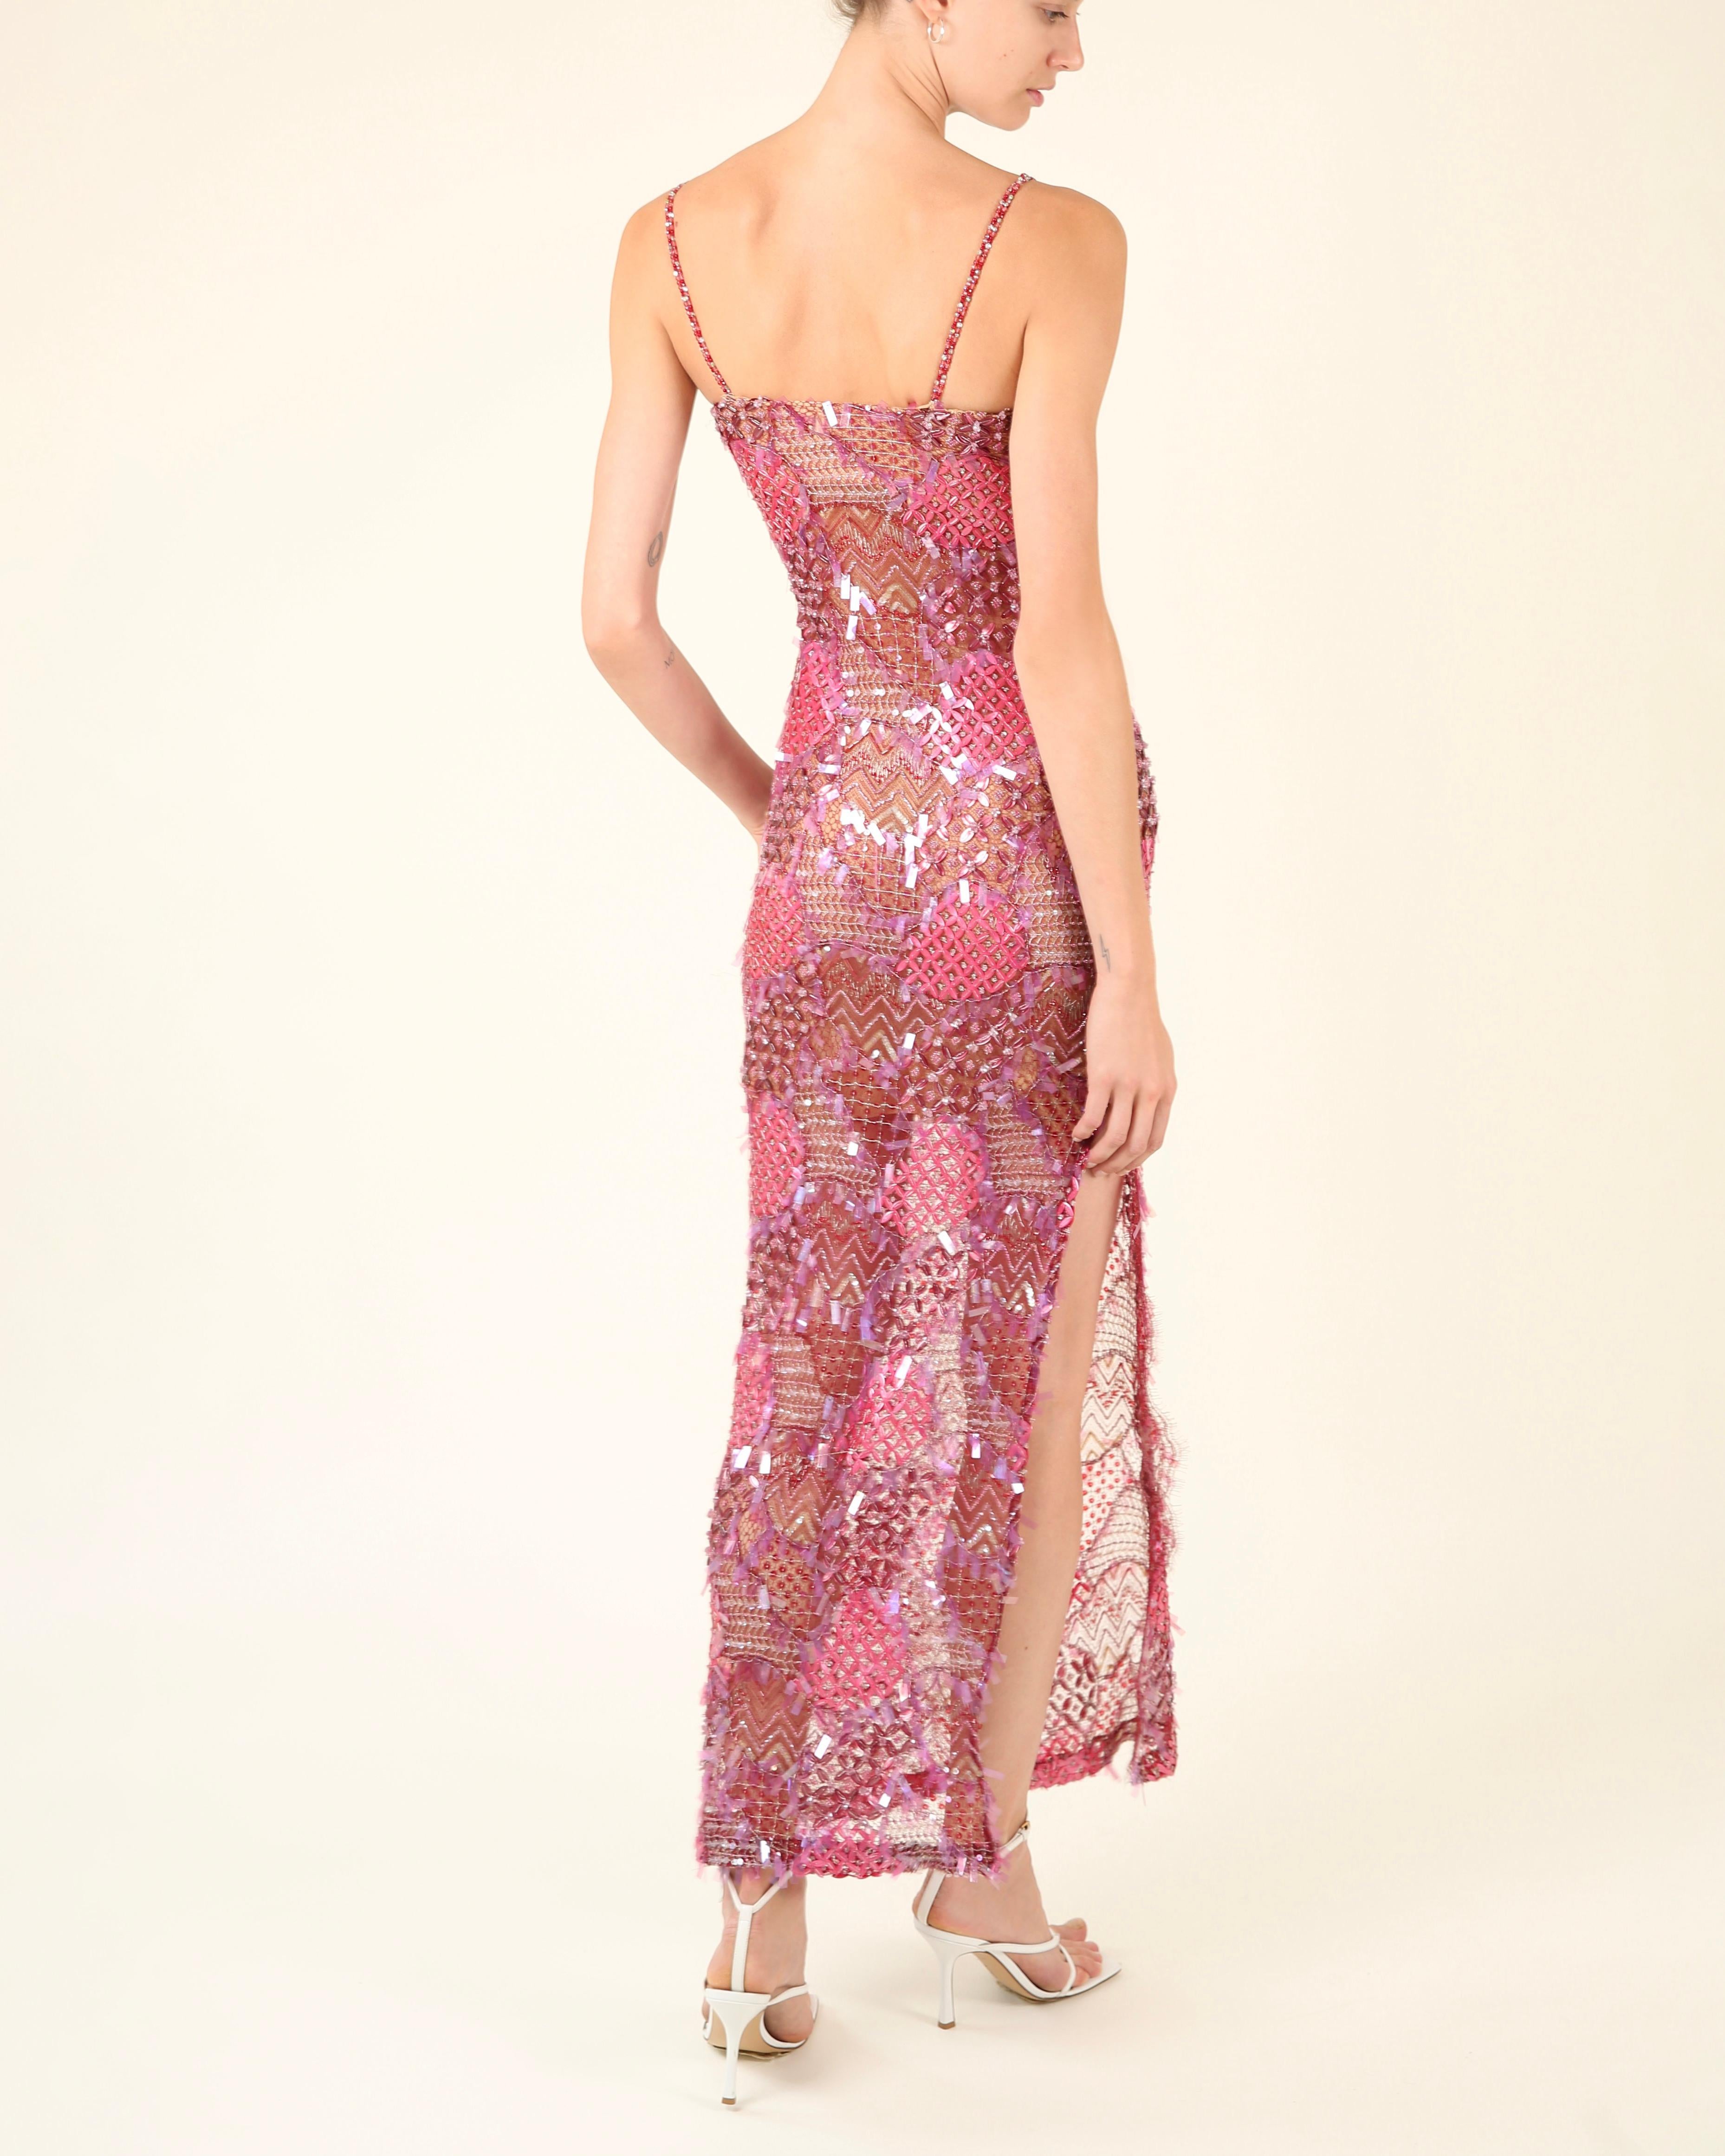 Loris Azzaro couture pink embellished sequin beaded sheer slit bustier dress XS For Sale 15